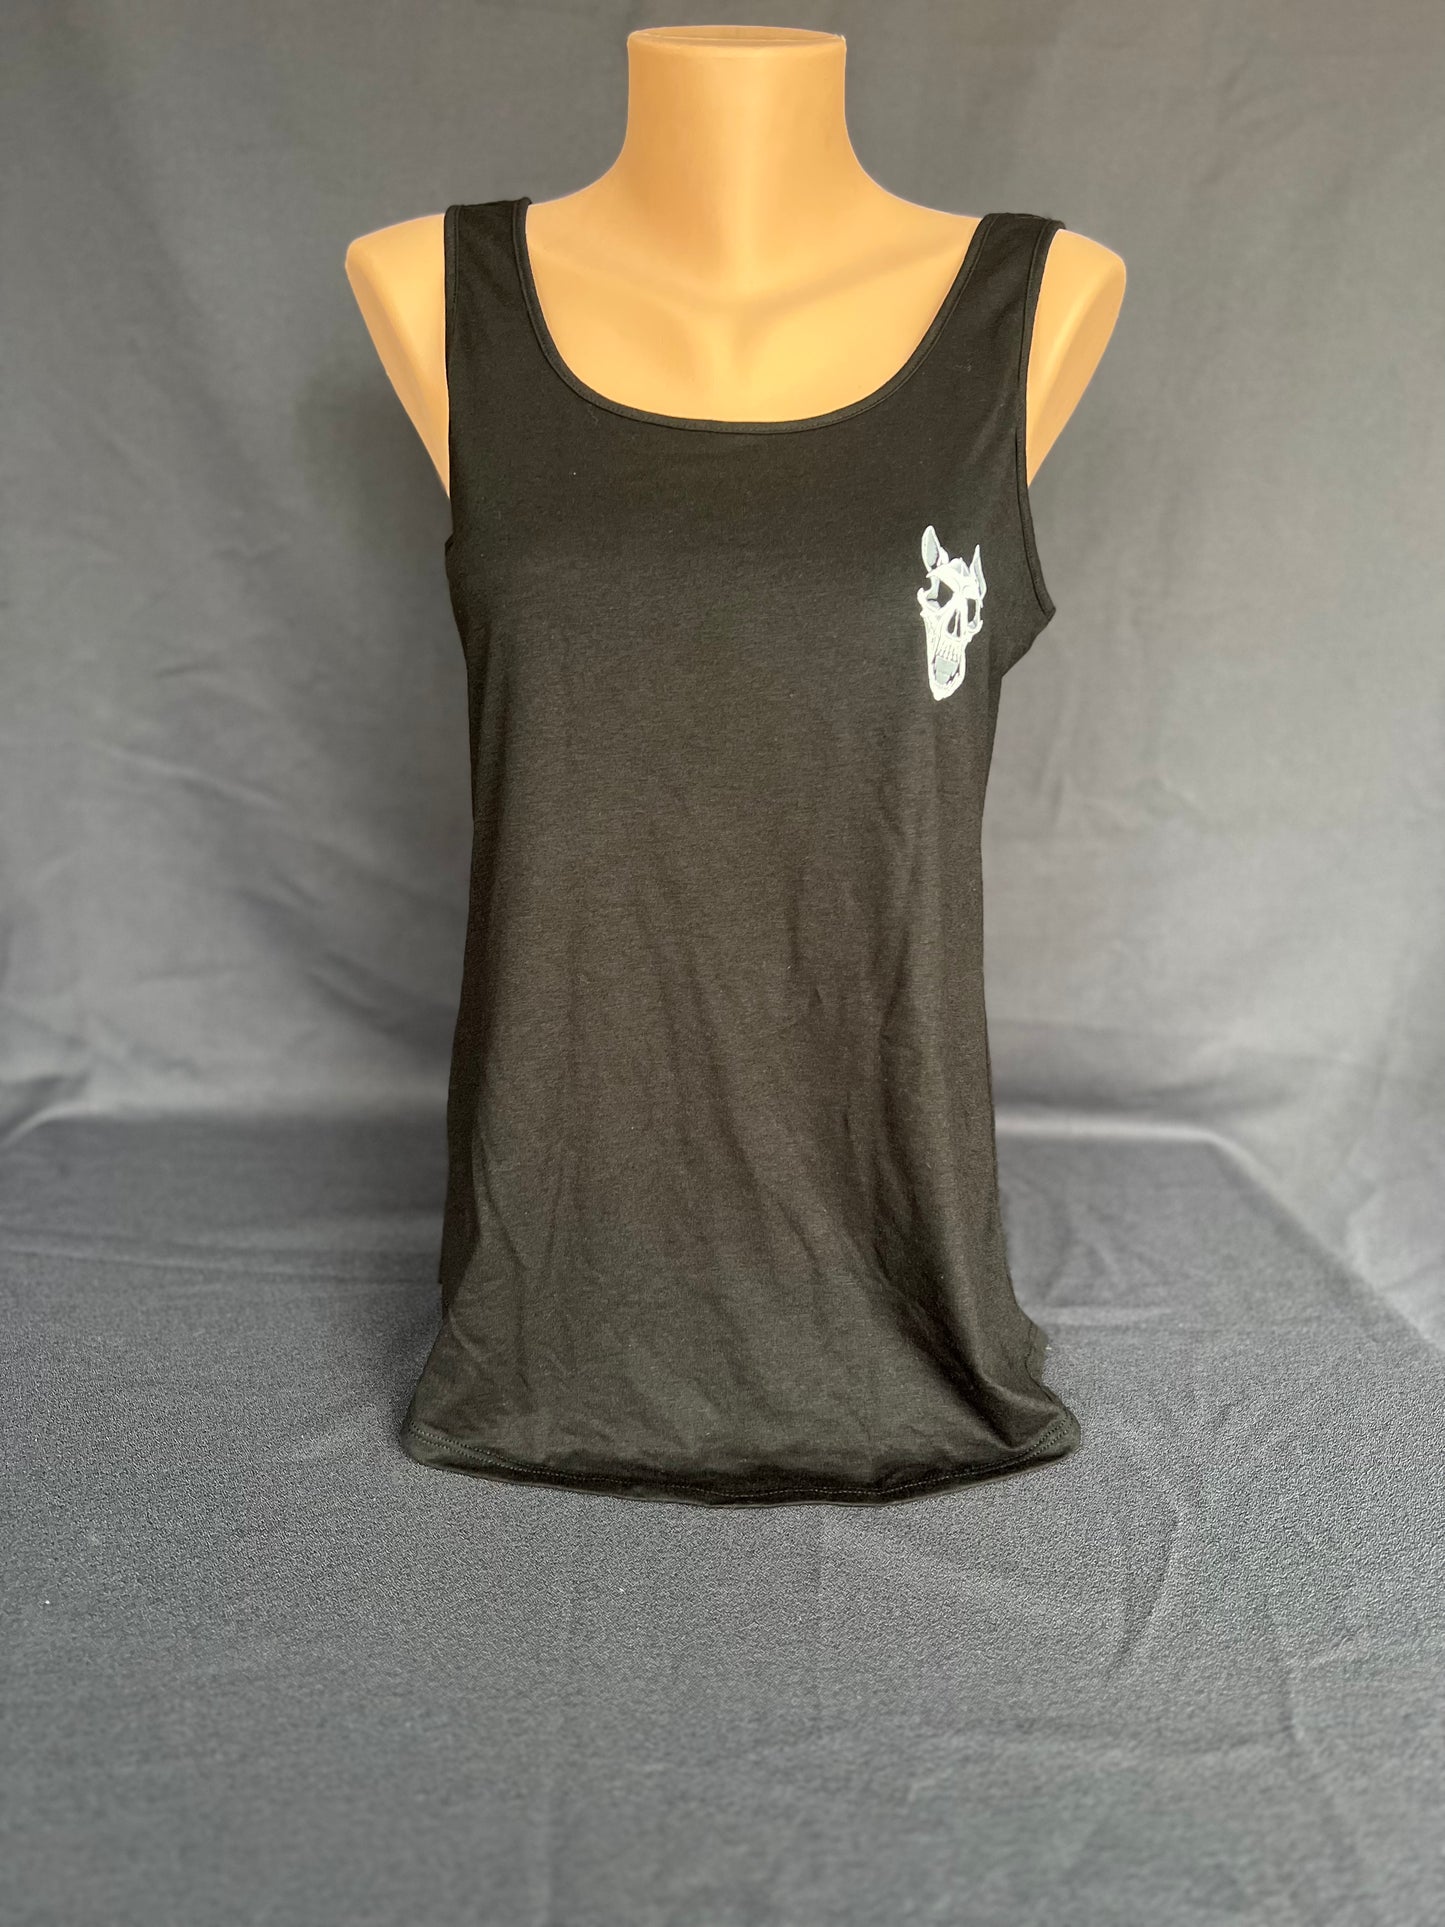 #7 Women's tank top (New to Store)